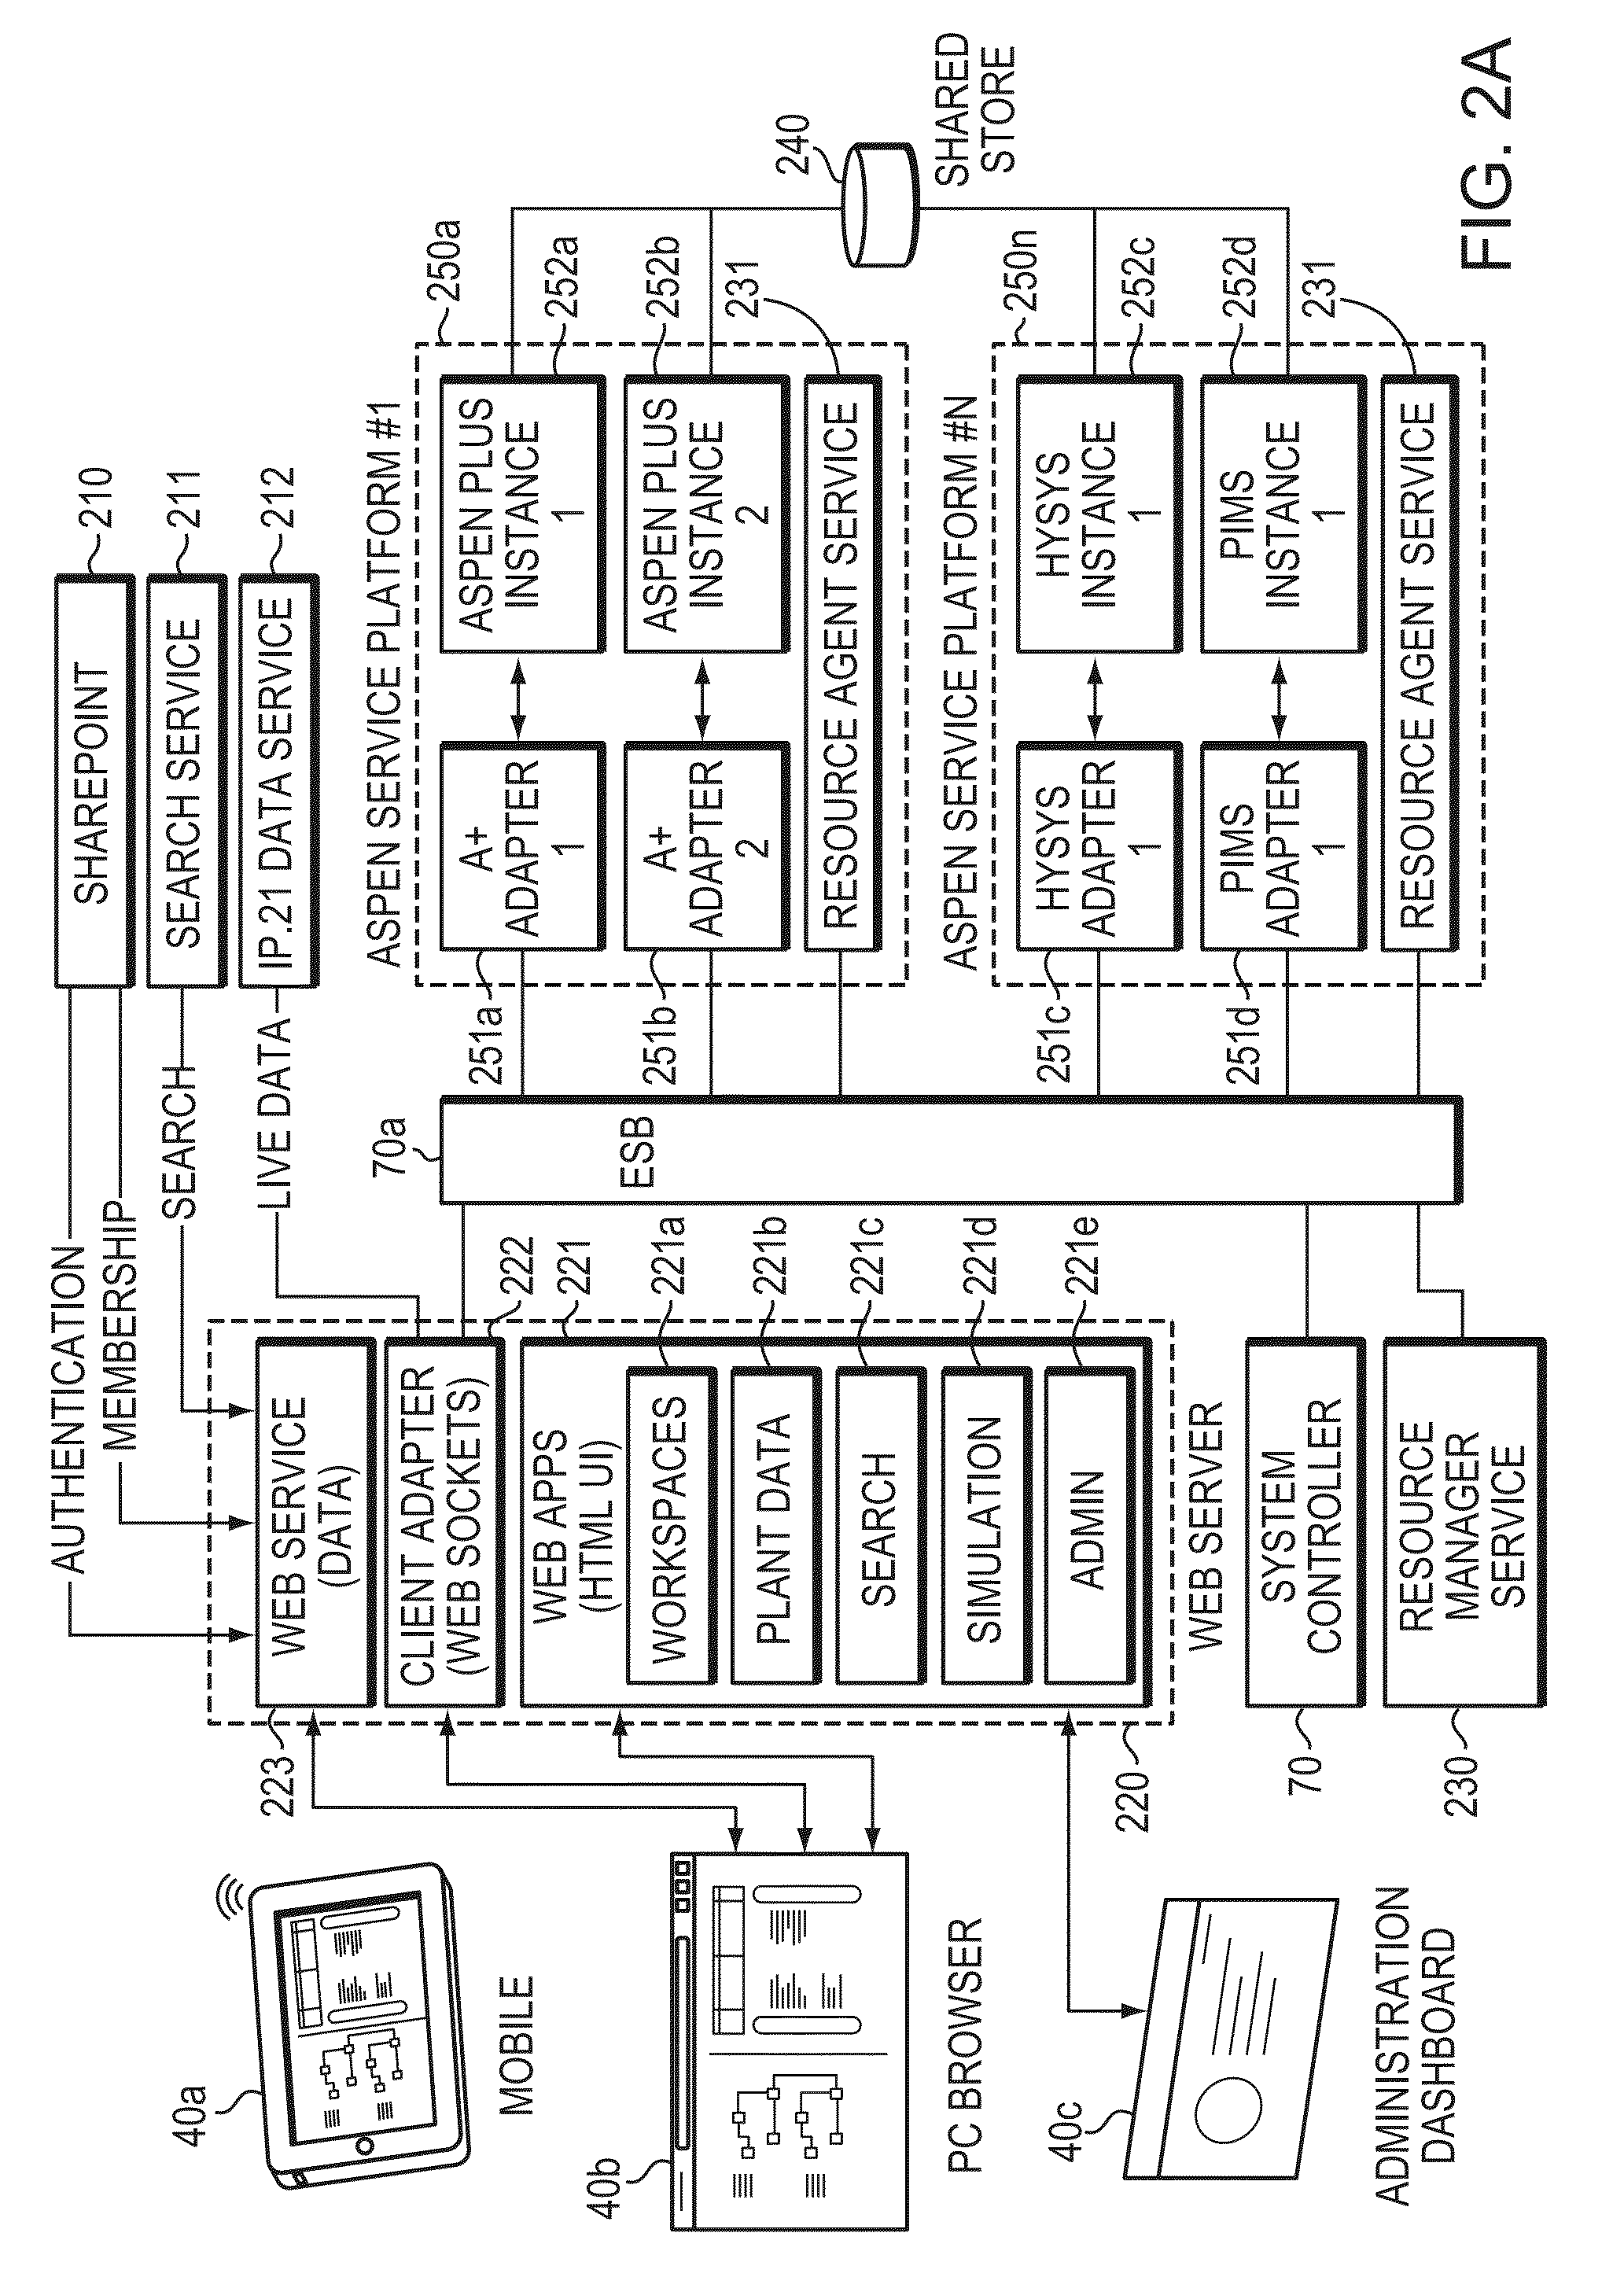 Method and system to unify and display simulation and real-time plant data for problem-solving